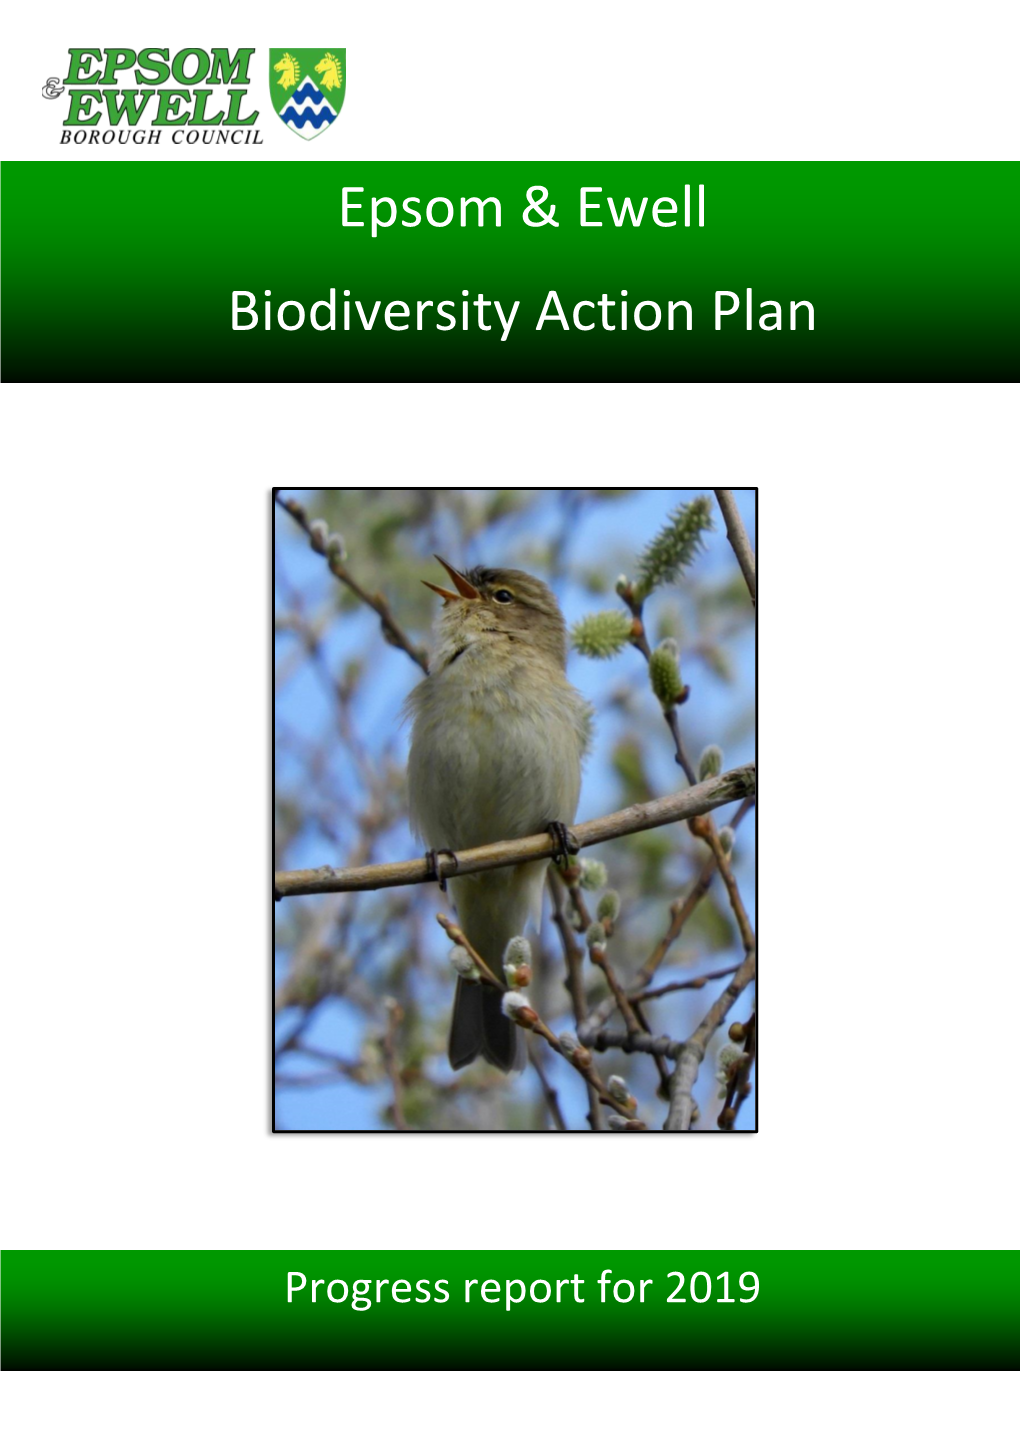 2019 Update on the Biodiversity Action Plan